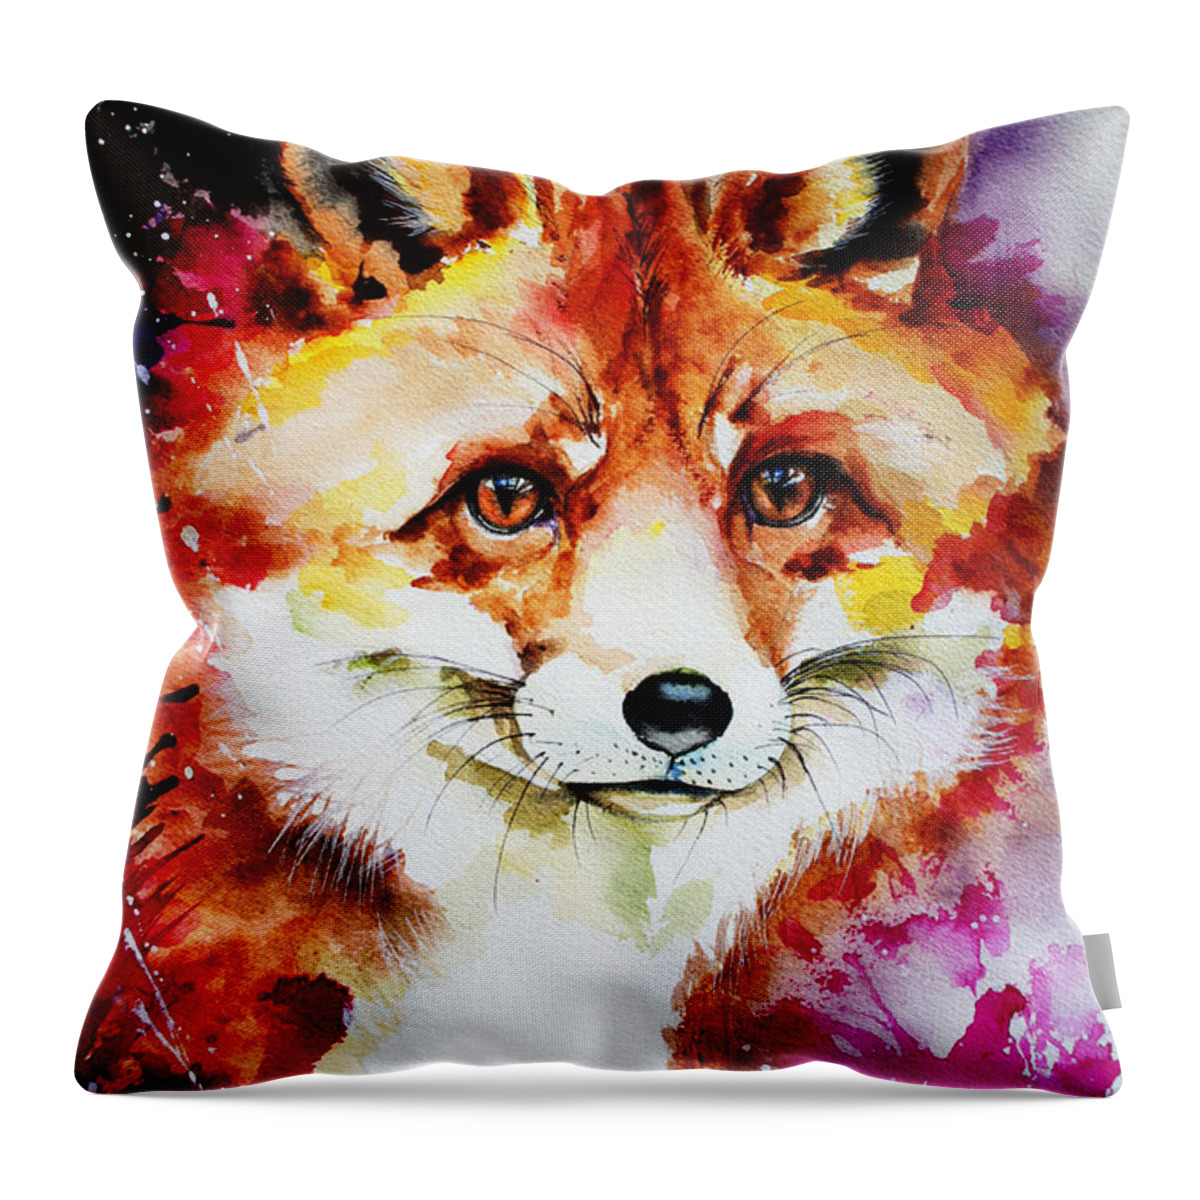 Red Throw Pillow featuring the painting Red Fox by Isabel Salvador